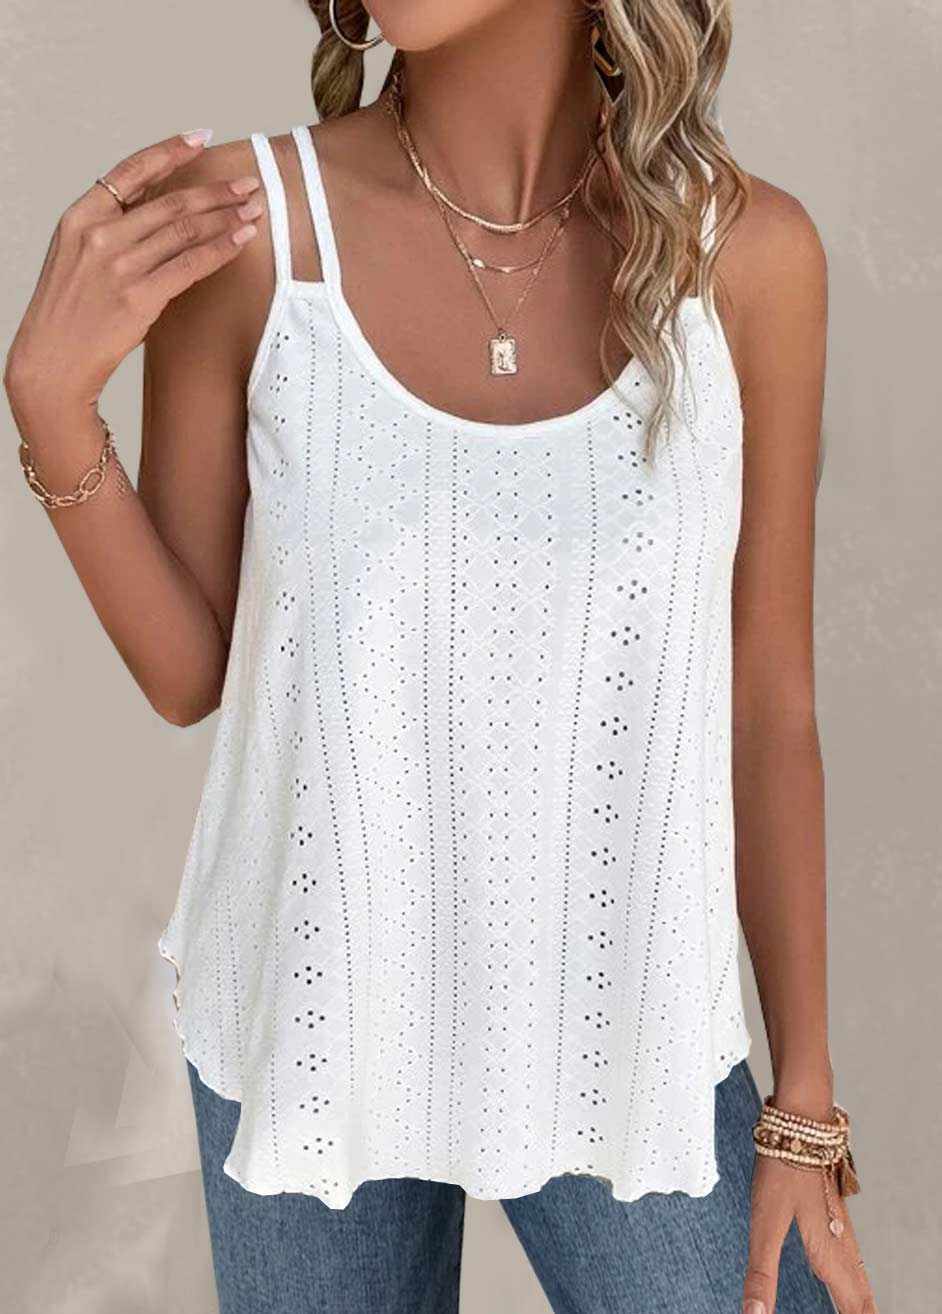 White Hole Scoop Neck Camisole Top